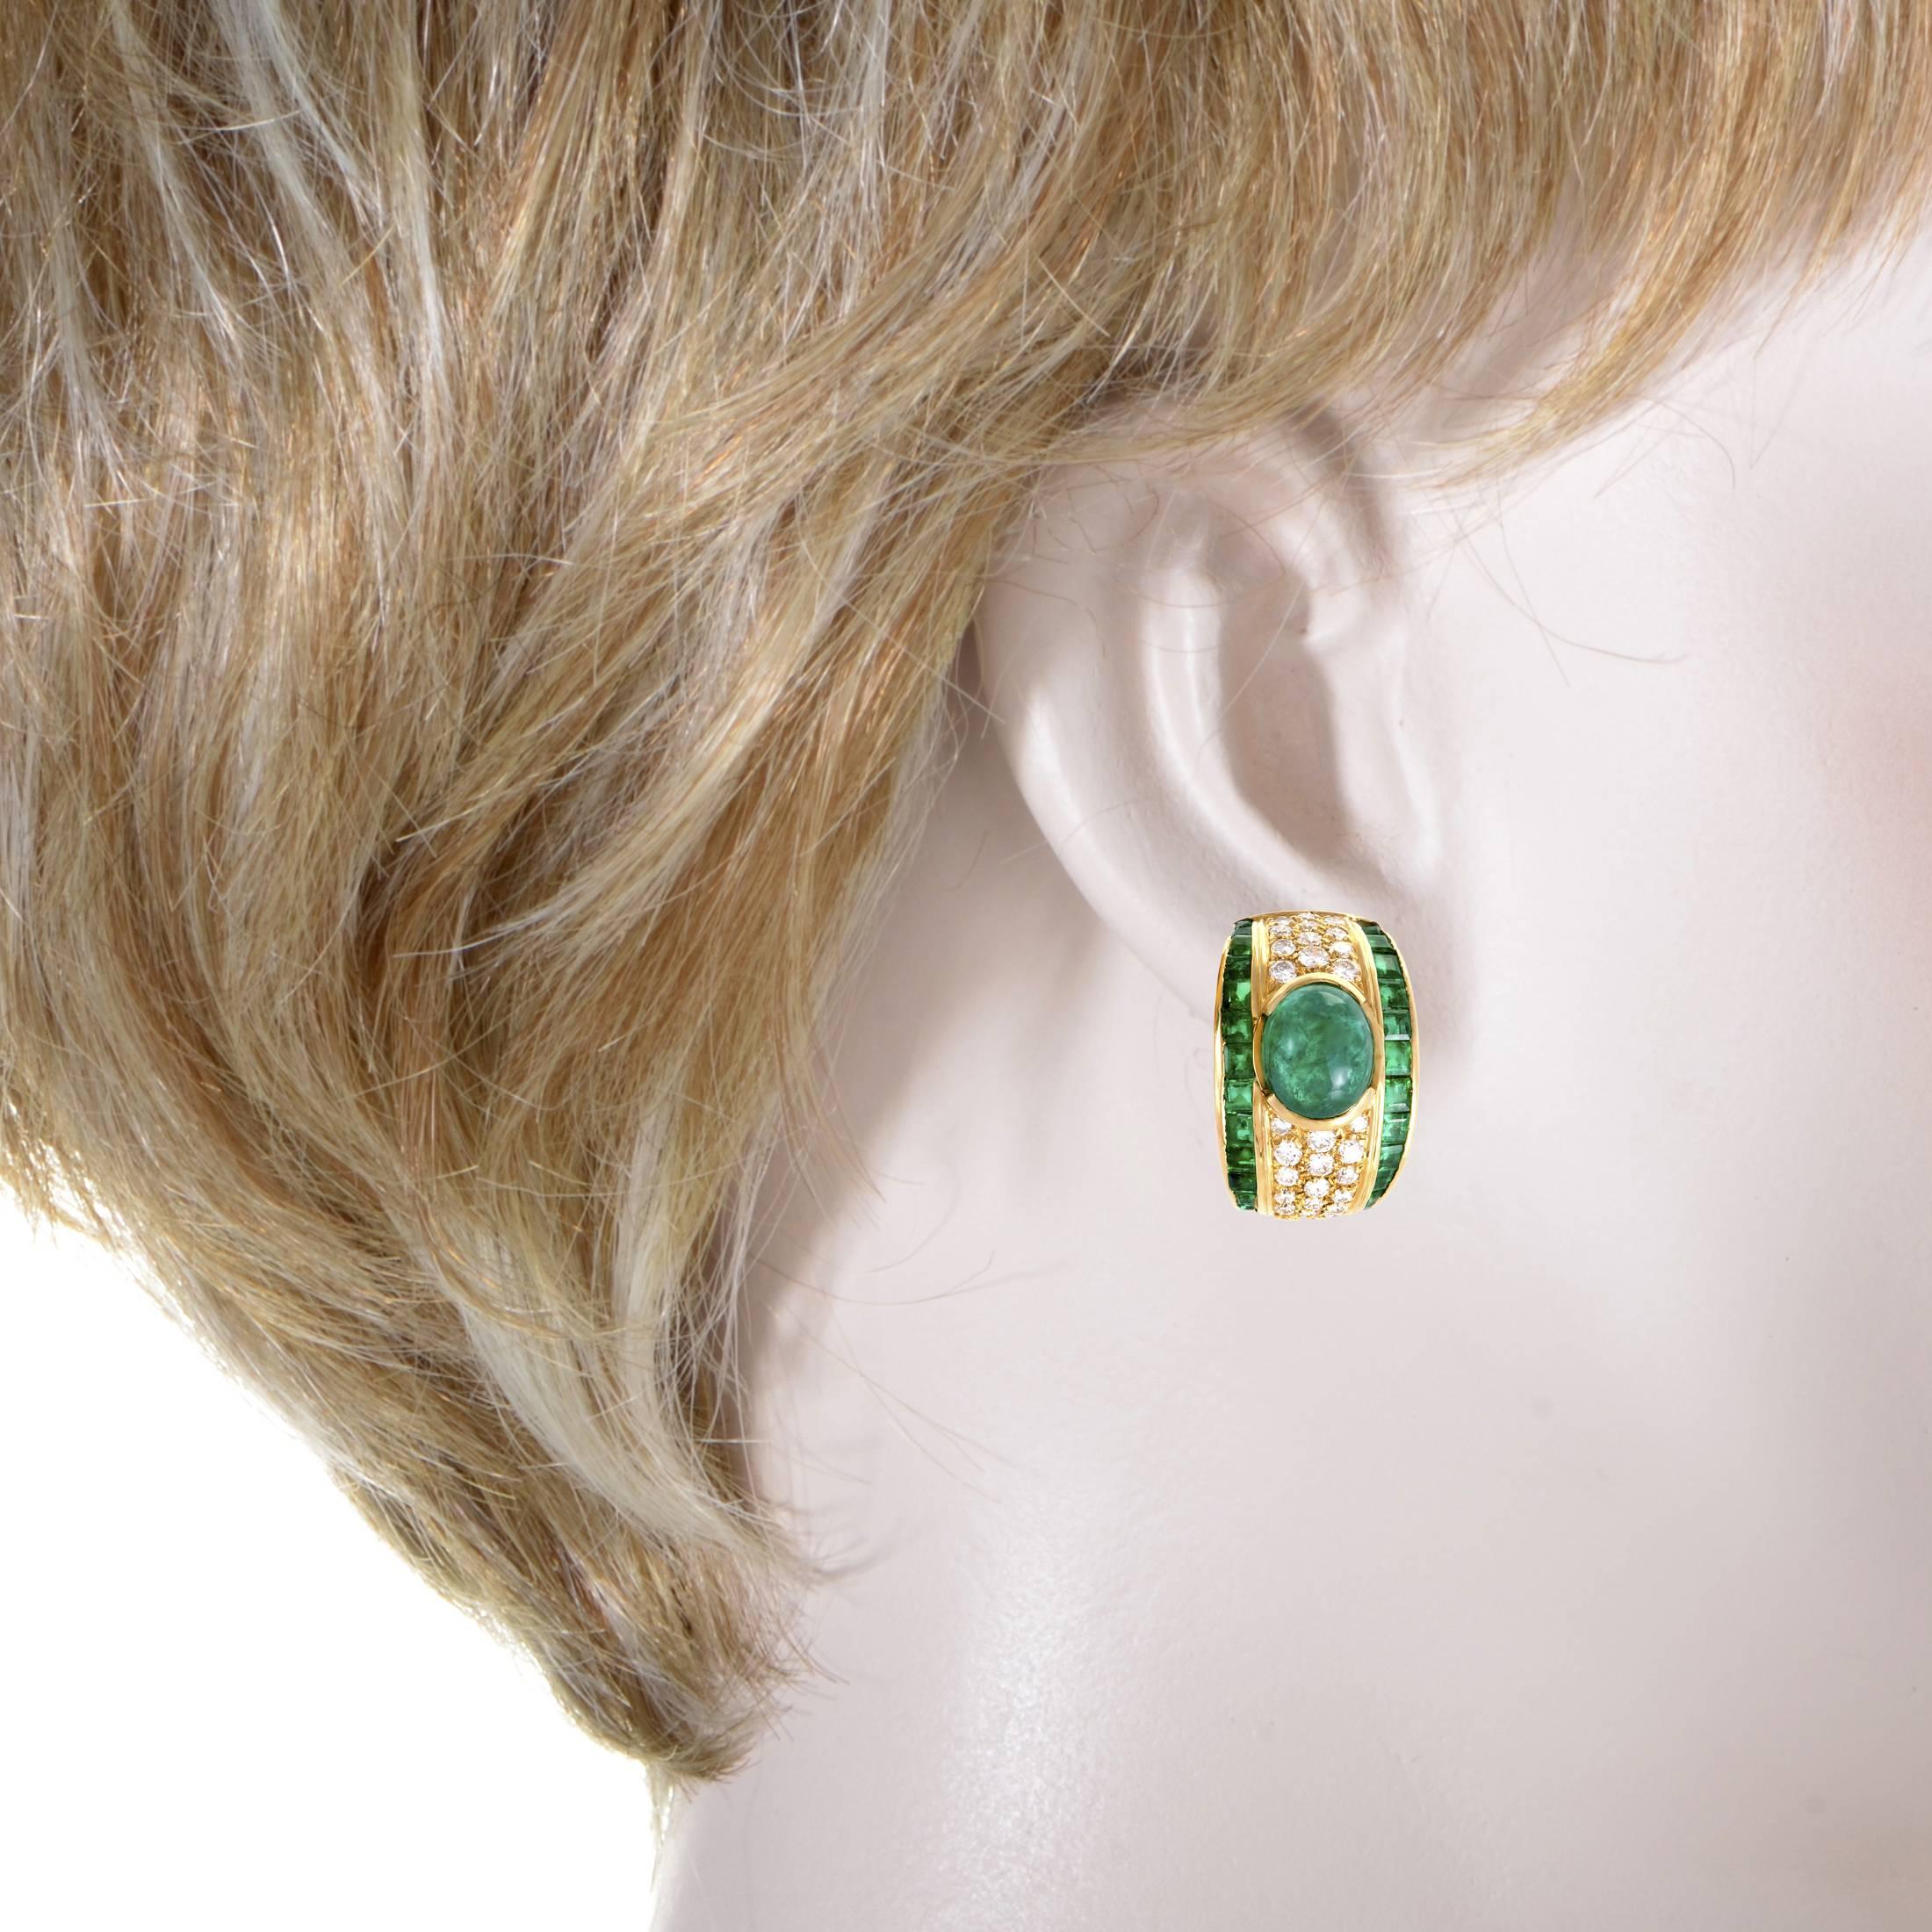 Featuring the luxurious combination of sparkly diamonds and regal emeralds complemented splendidly by radiant 18K yellow gold, these stunning earrings offer a wonderfully refined appearance. The emeralds total approximately 8.50 carats and the